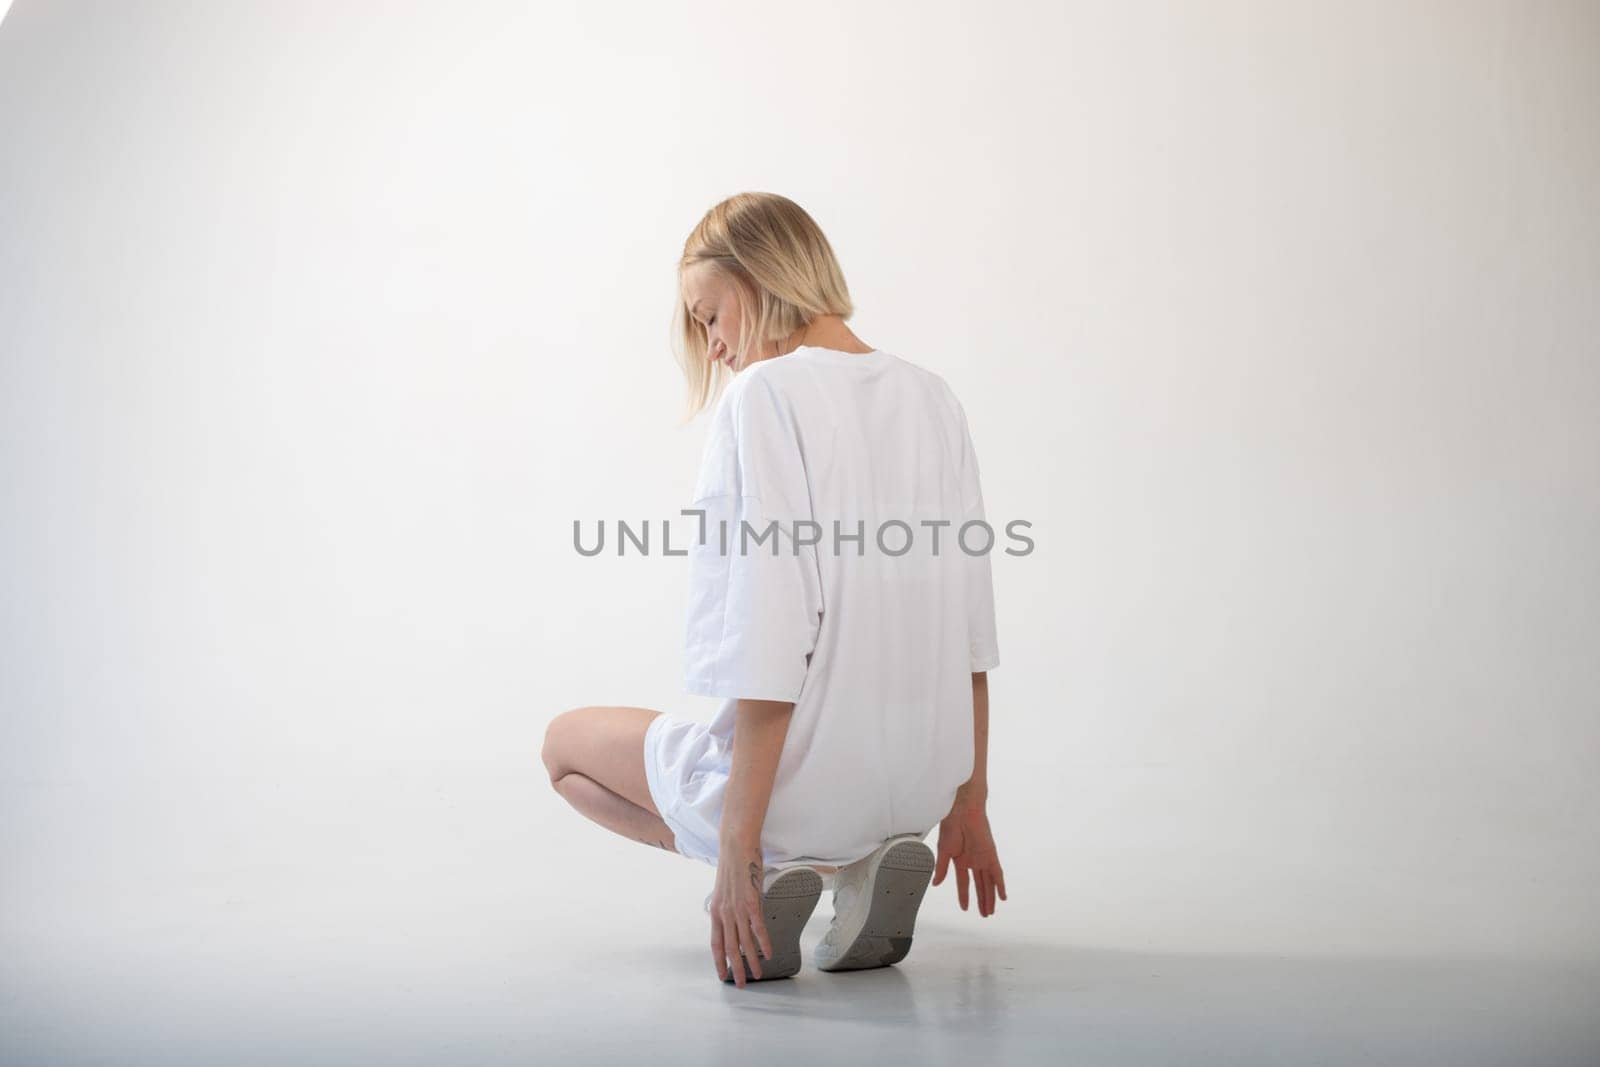 Beautiful girl in a white oversized t-shirt posing on a white background. High quality photo